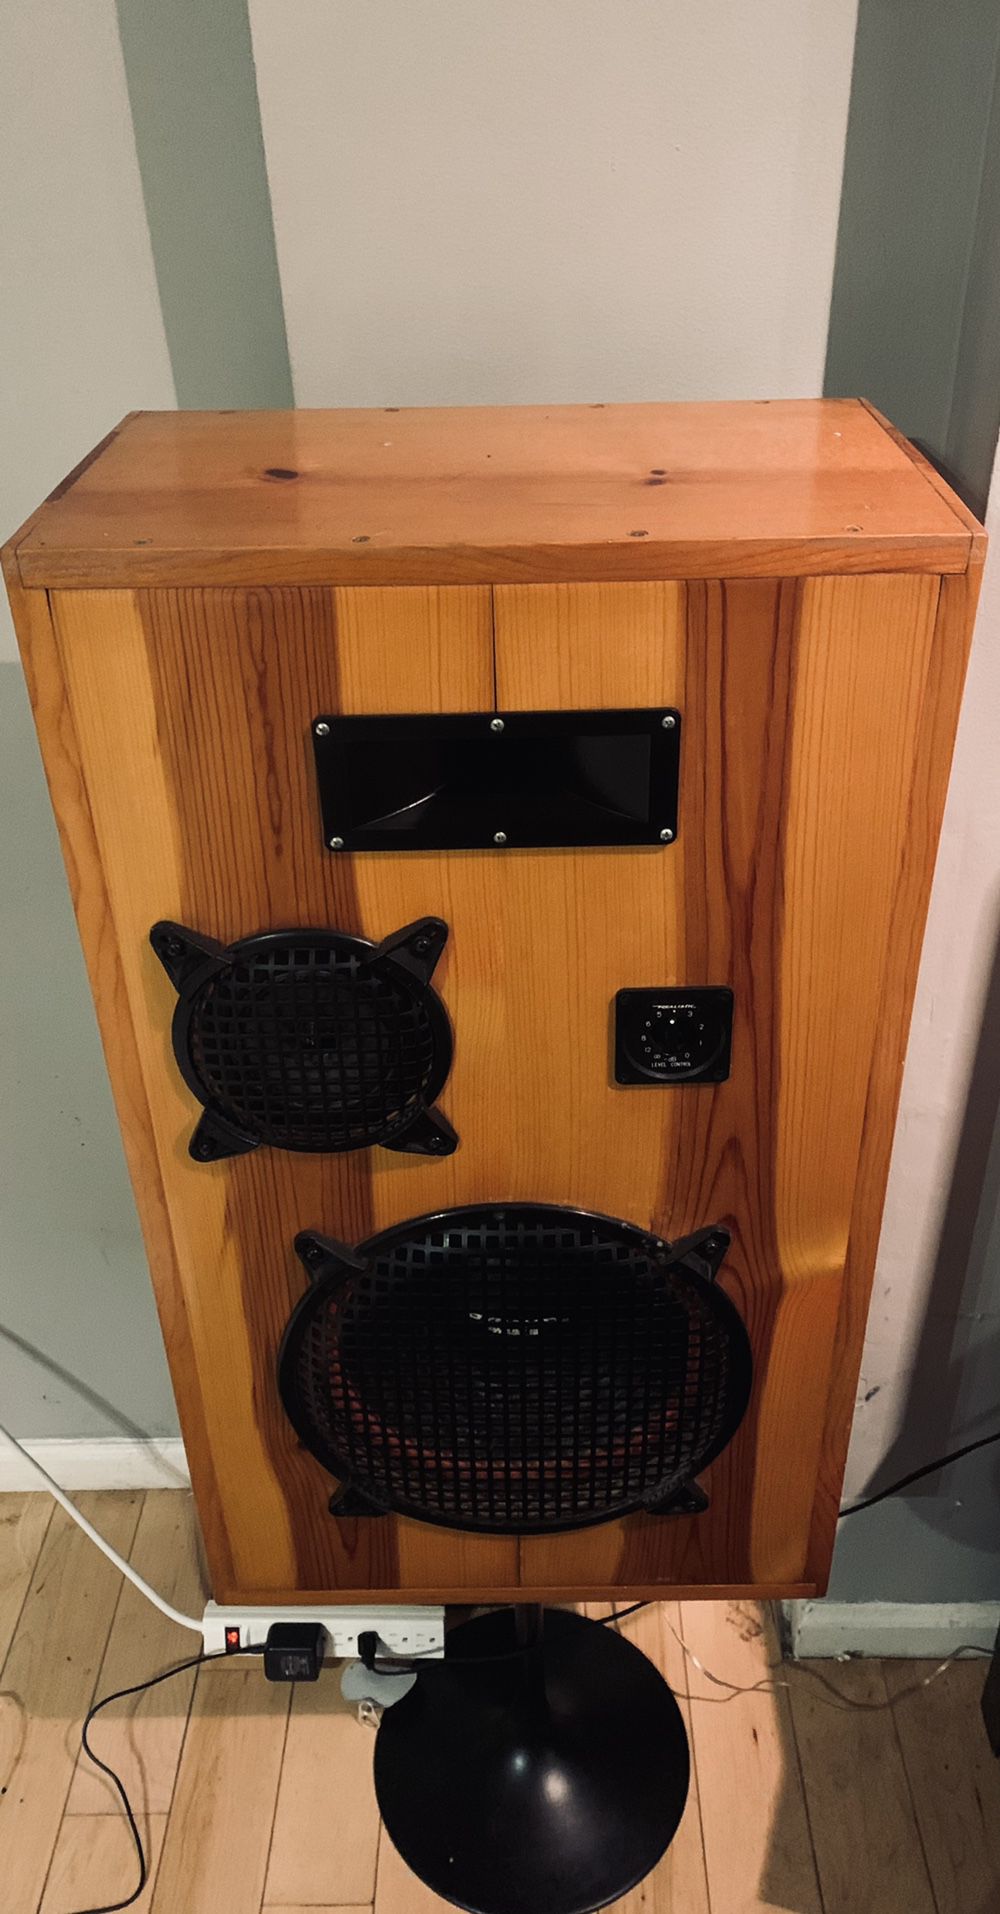 Pair Of Speakers For Parties Or Theater Set Up 